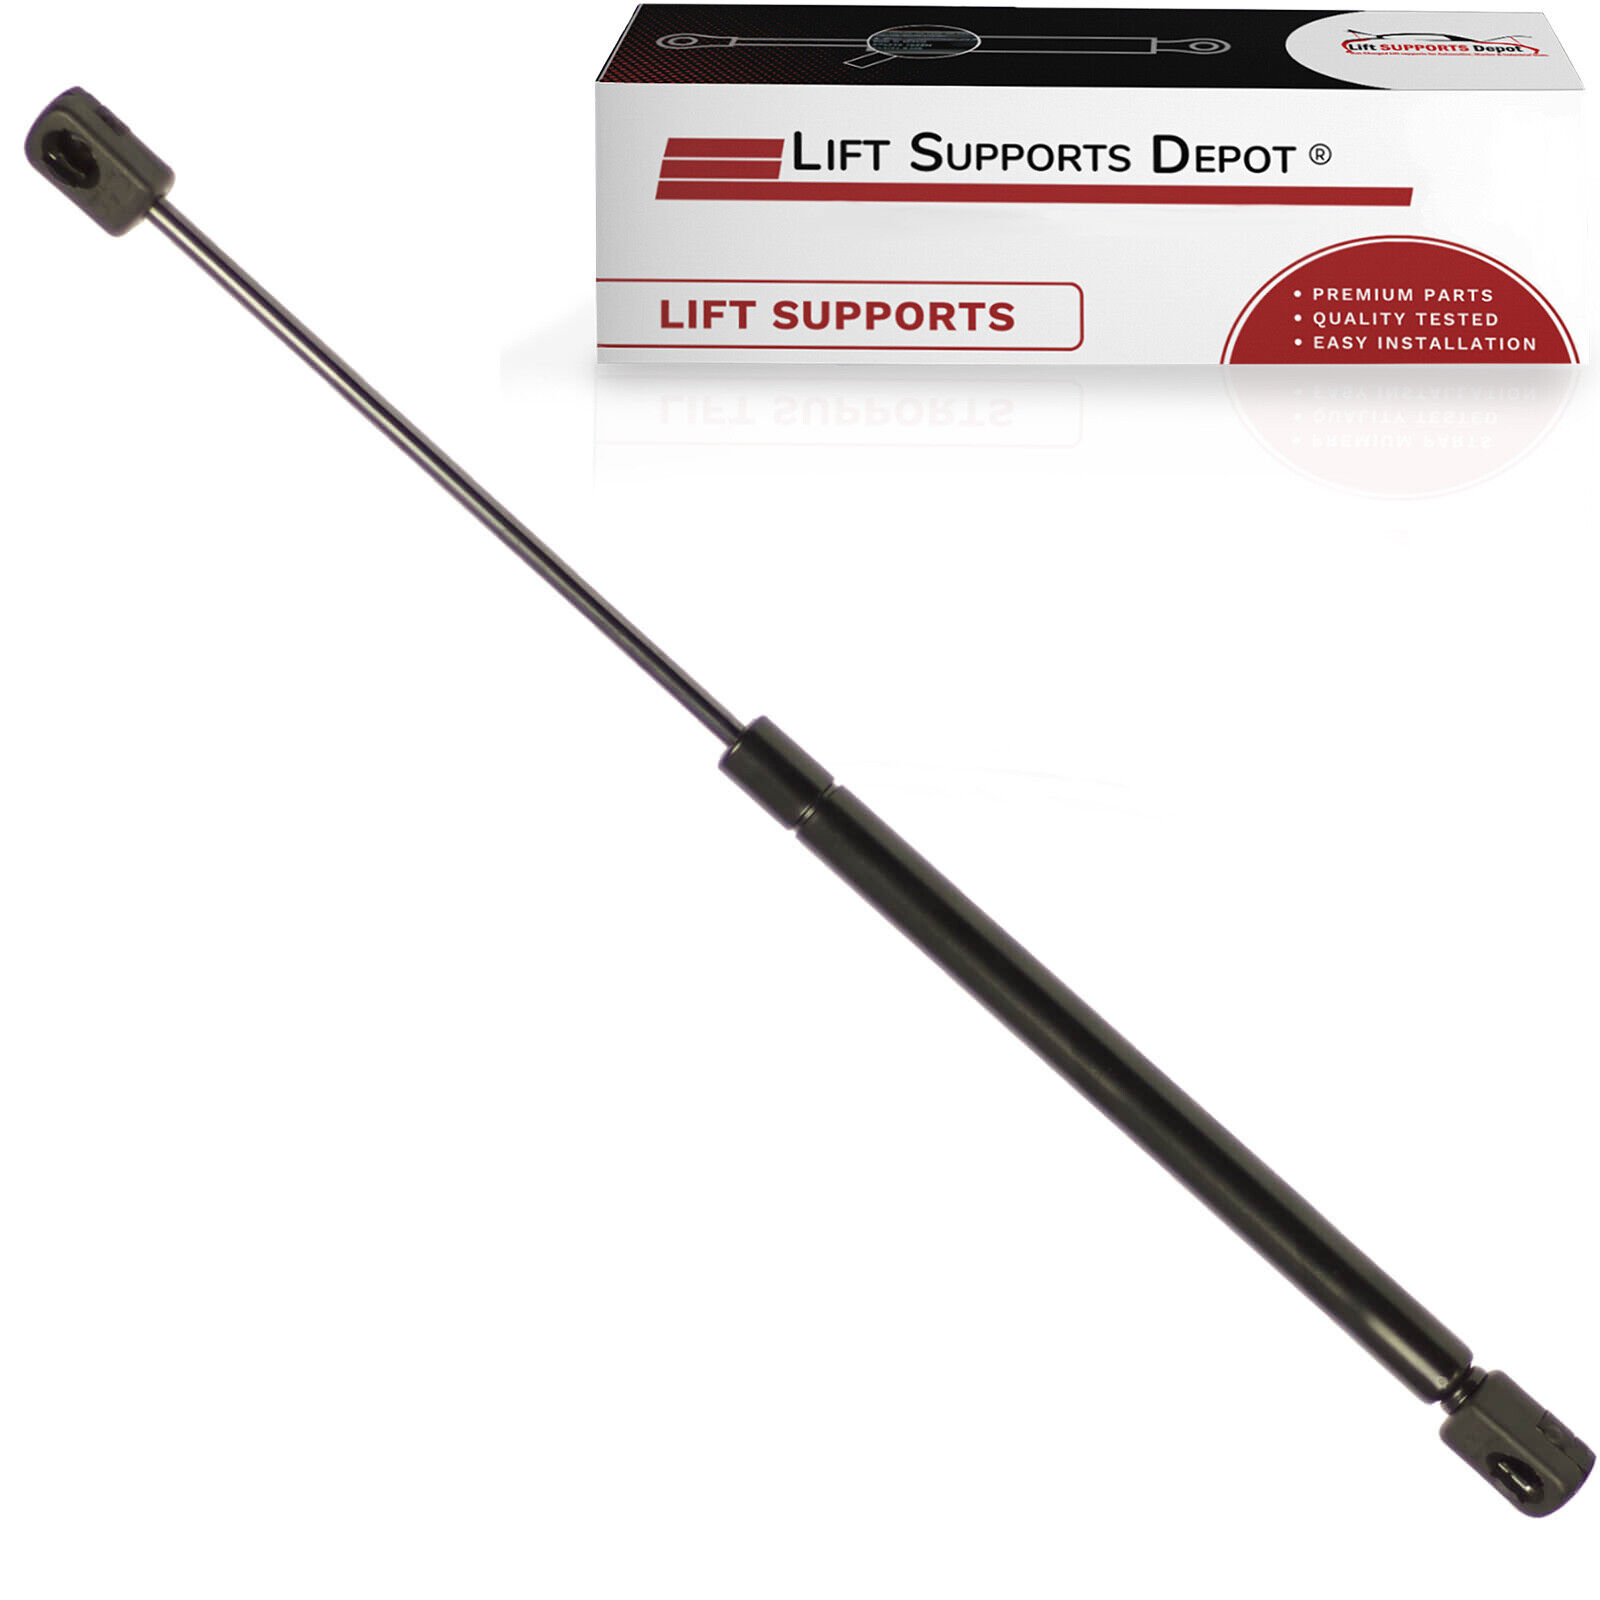 Qty 1 Fits Can-Am RT Maserati Spyder 2010 to 2018 Models Seat Lift Support